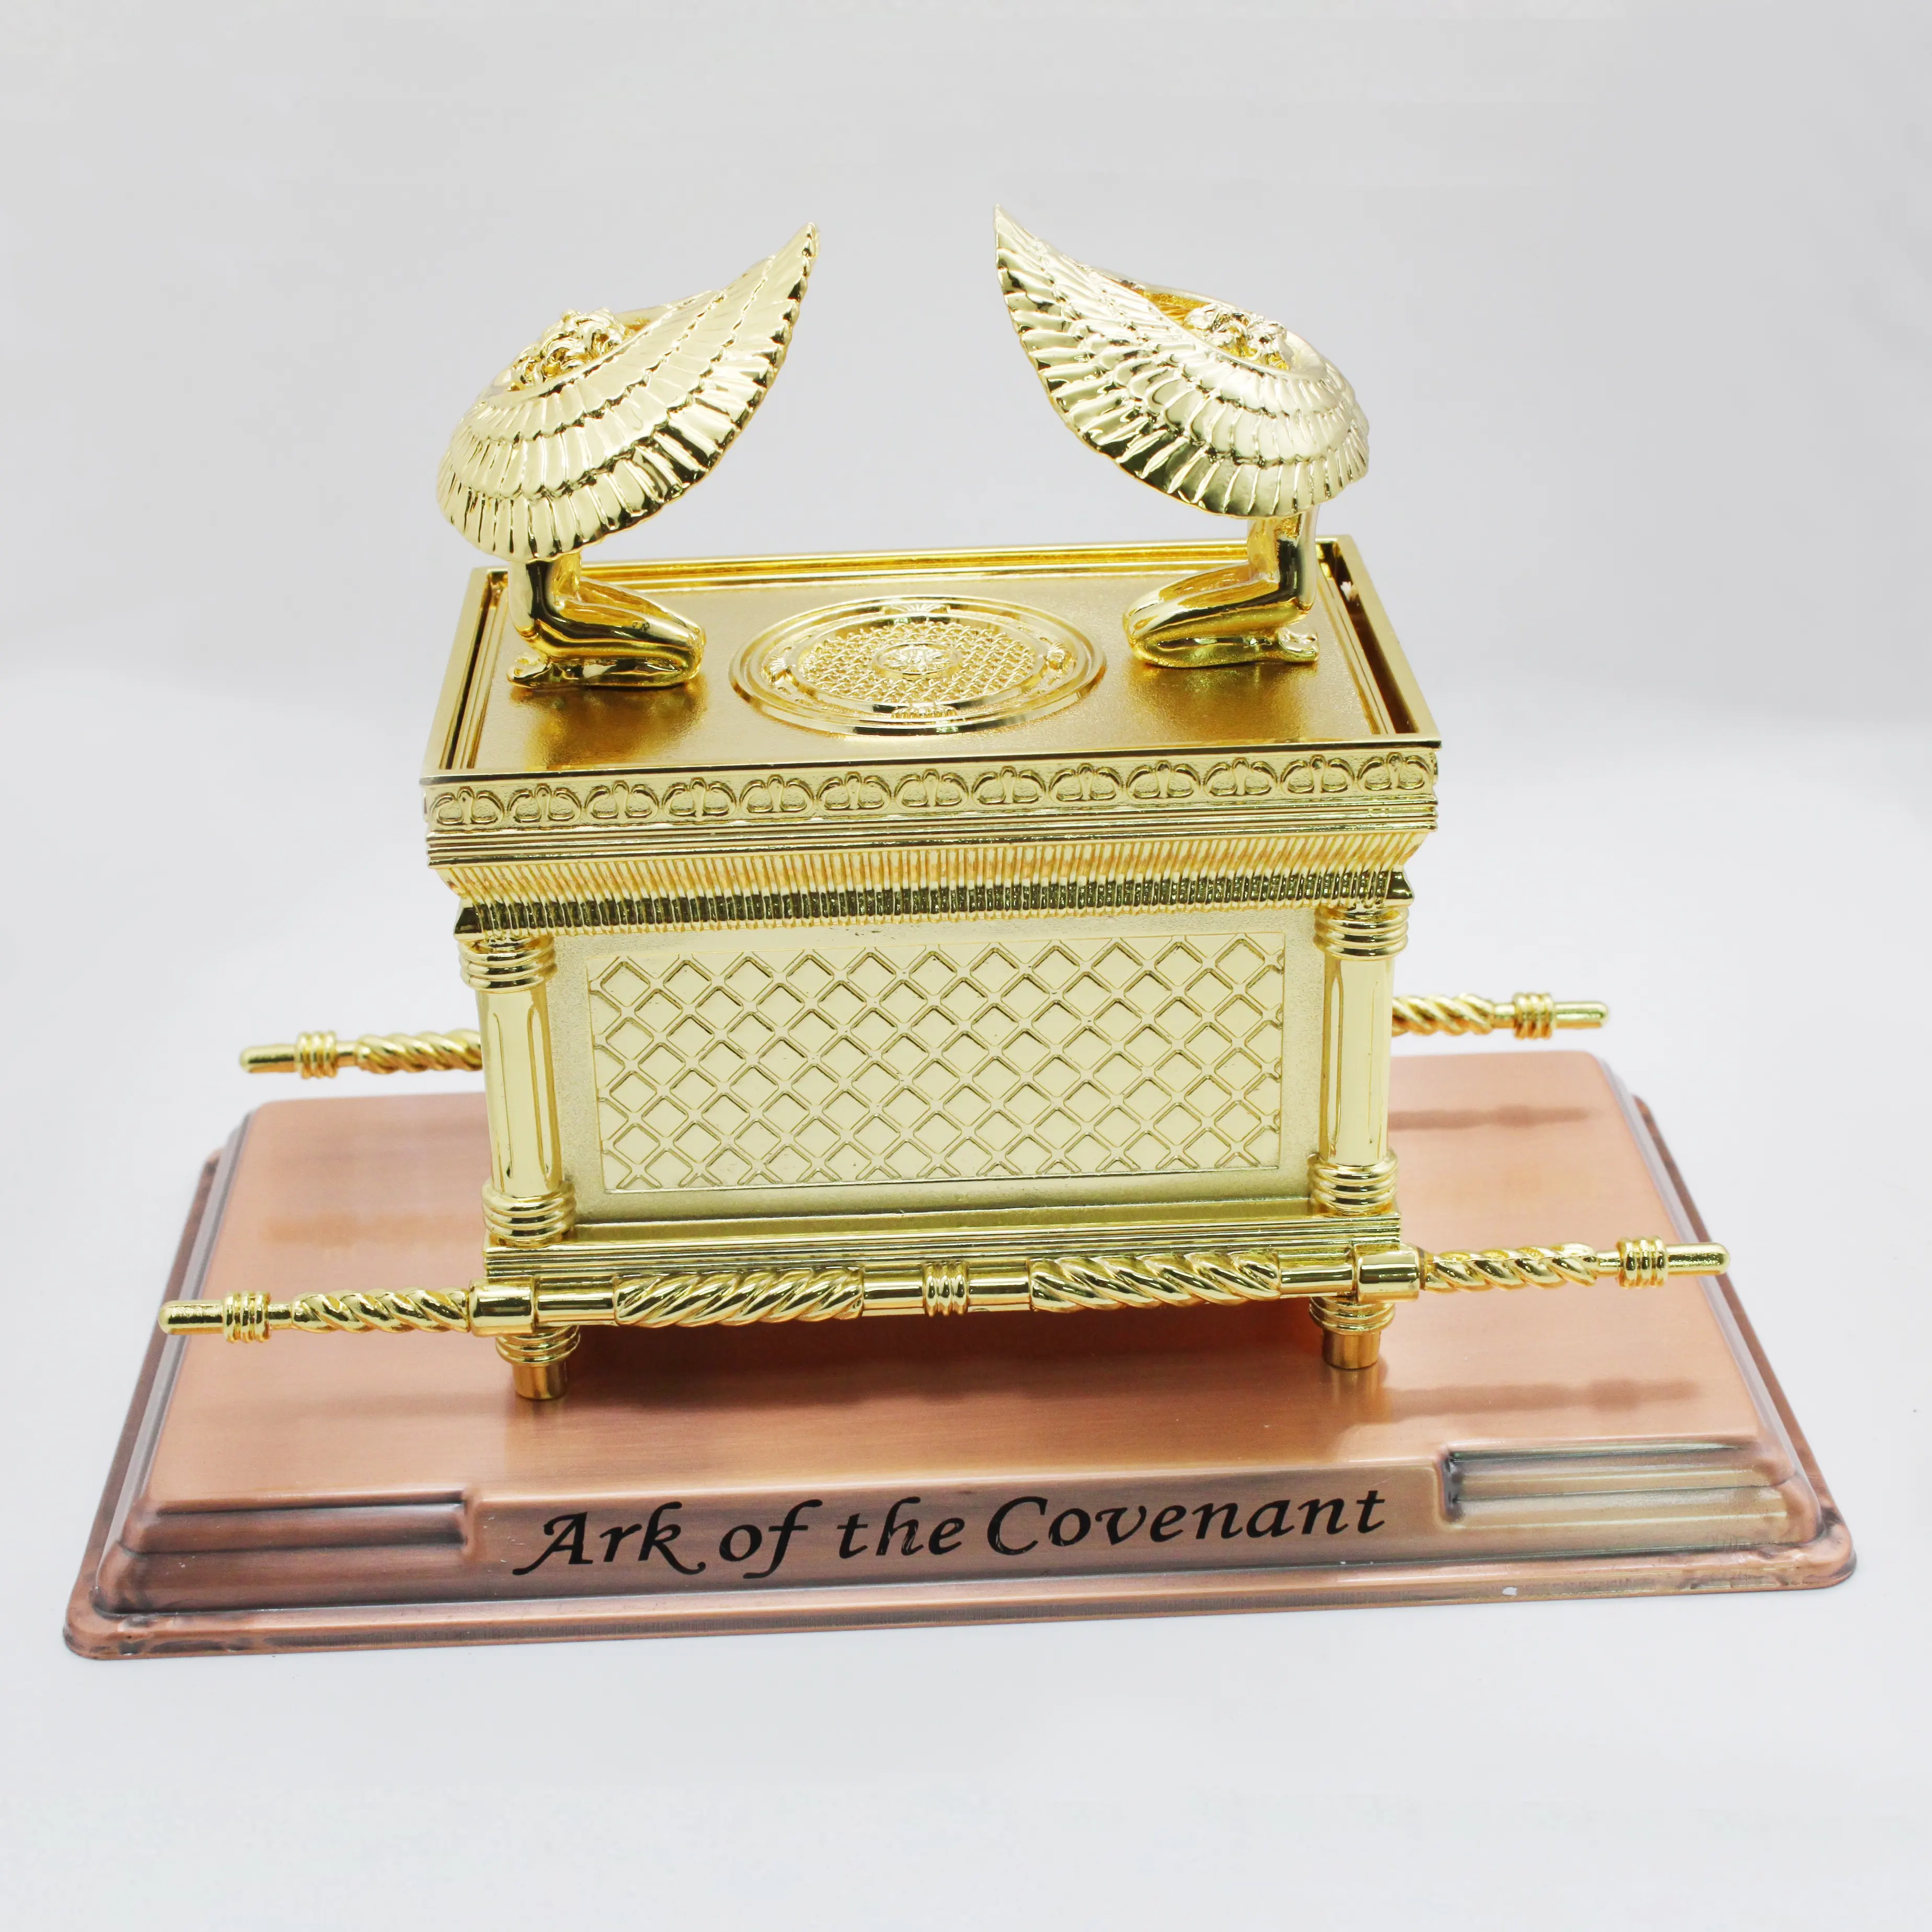 Church Supplies Jesus Ark Biblical Holy Bible Large The Ark of the Covenant Model Large Size